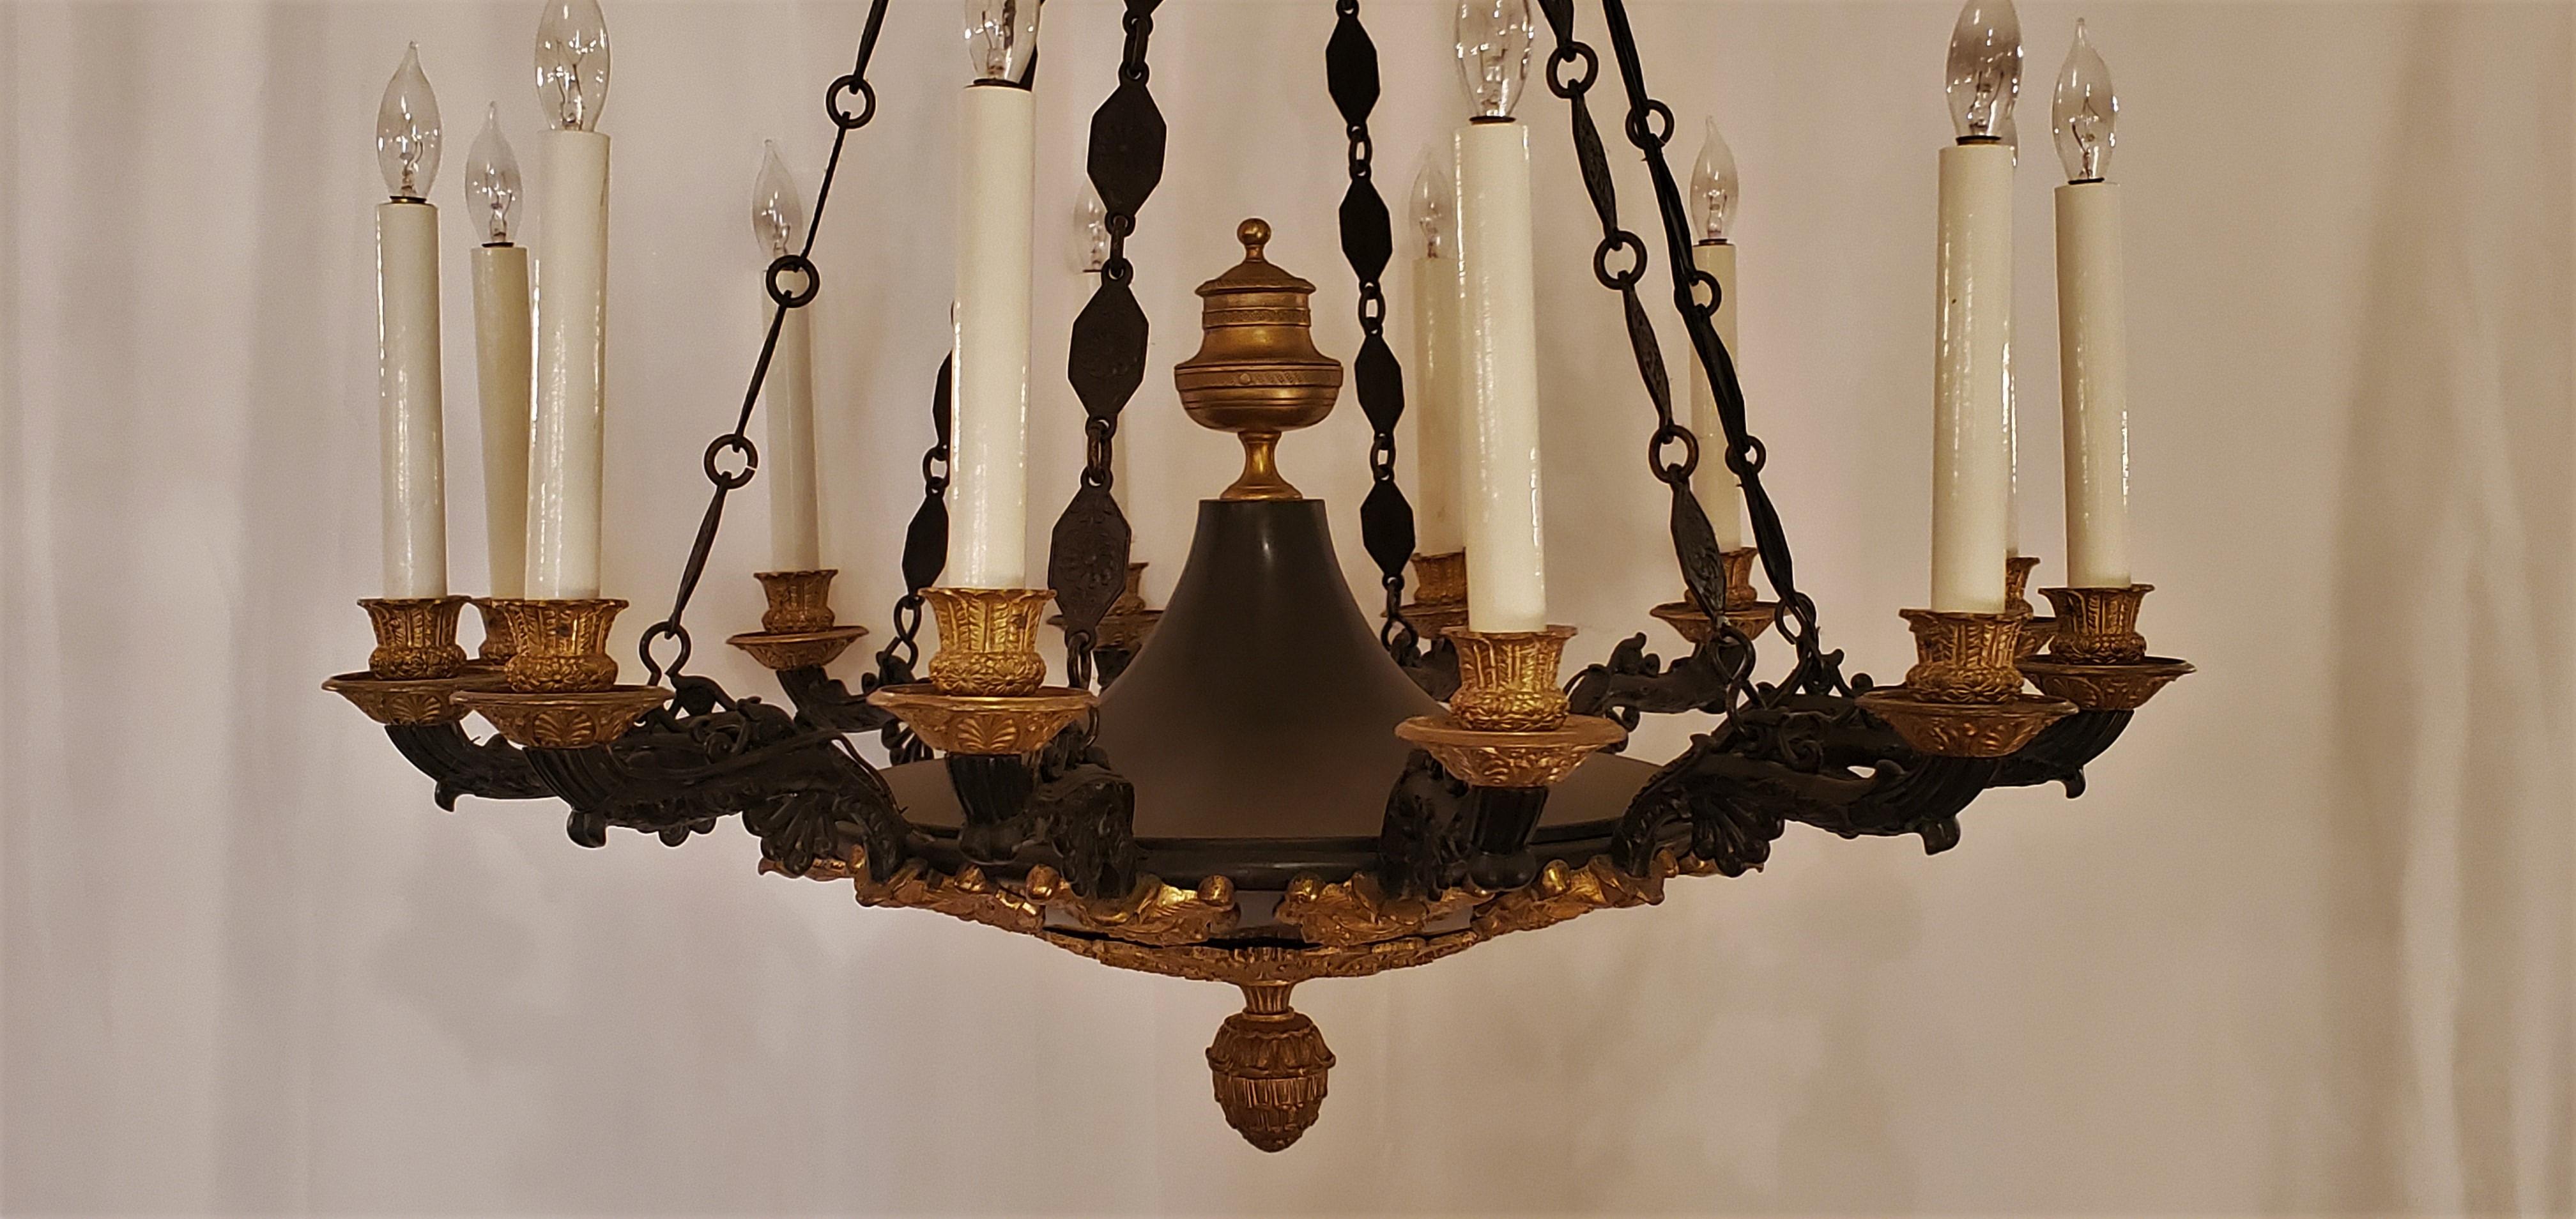 19th Century Antique French Empire Ormolu and Patinated Bronze Chandelier For Sale